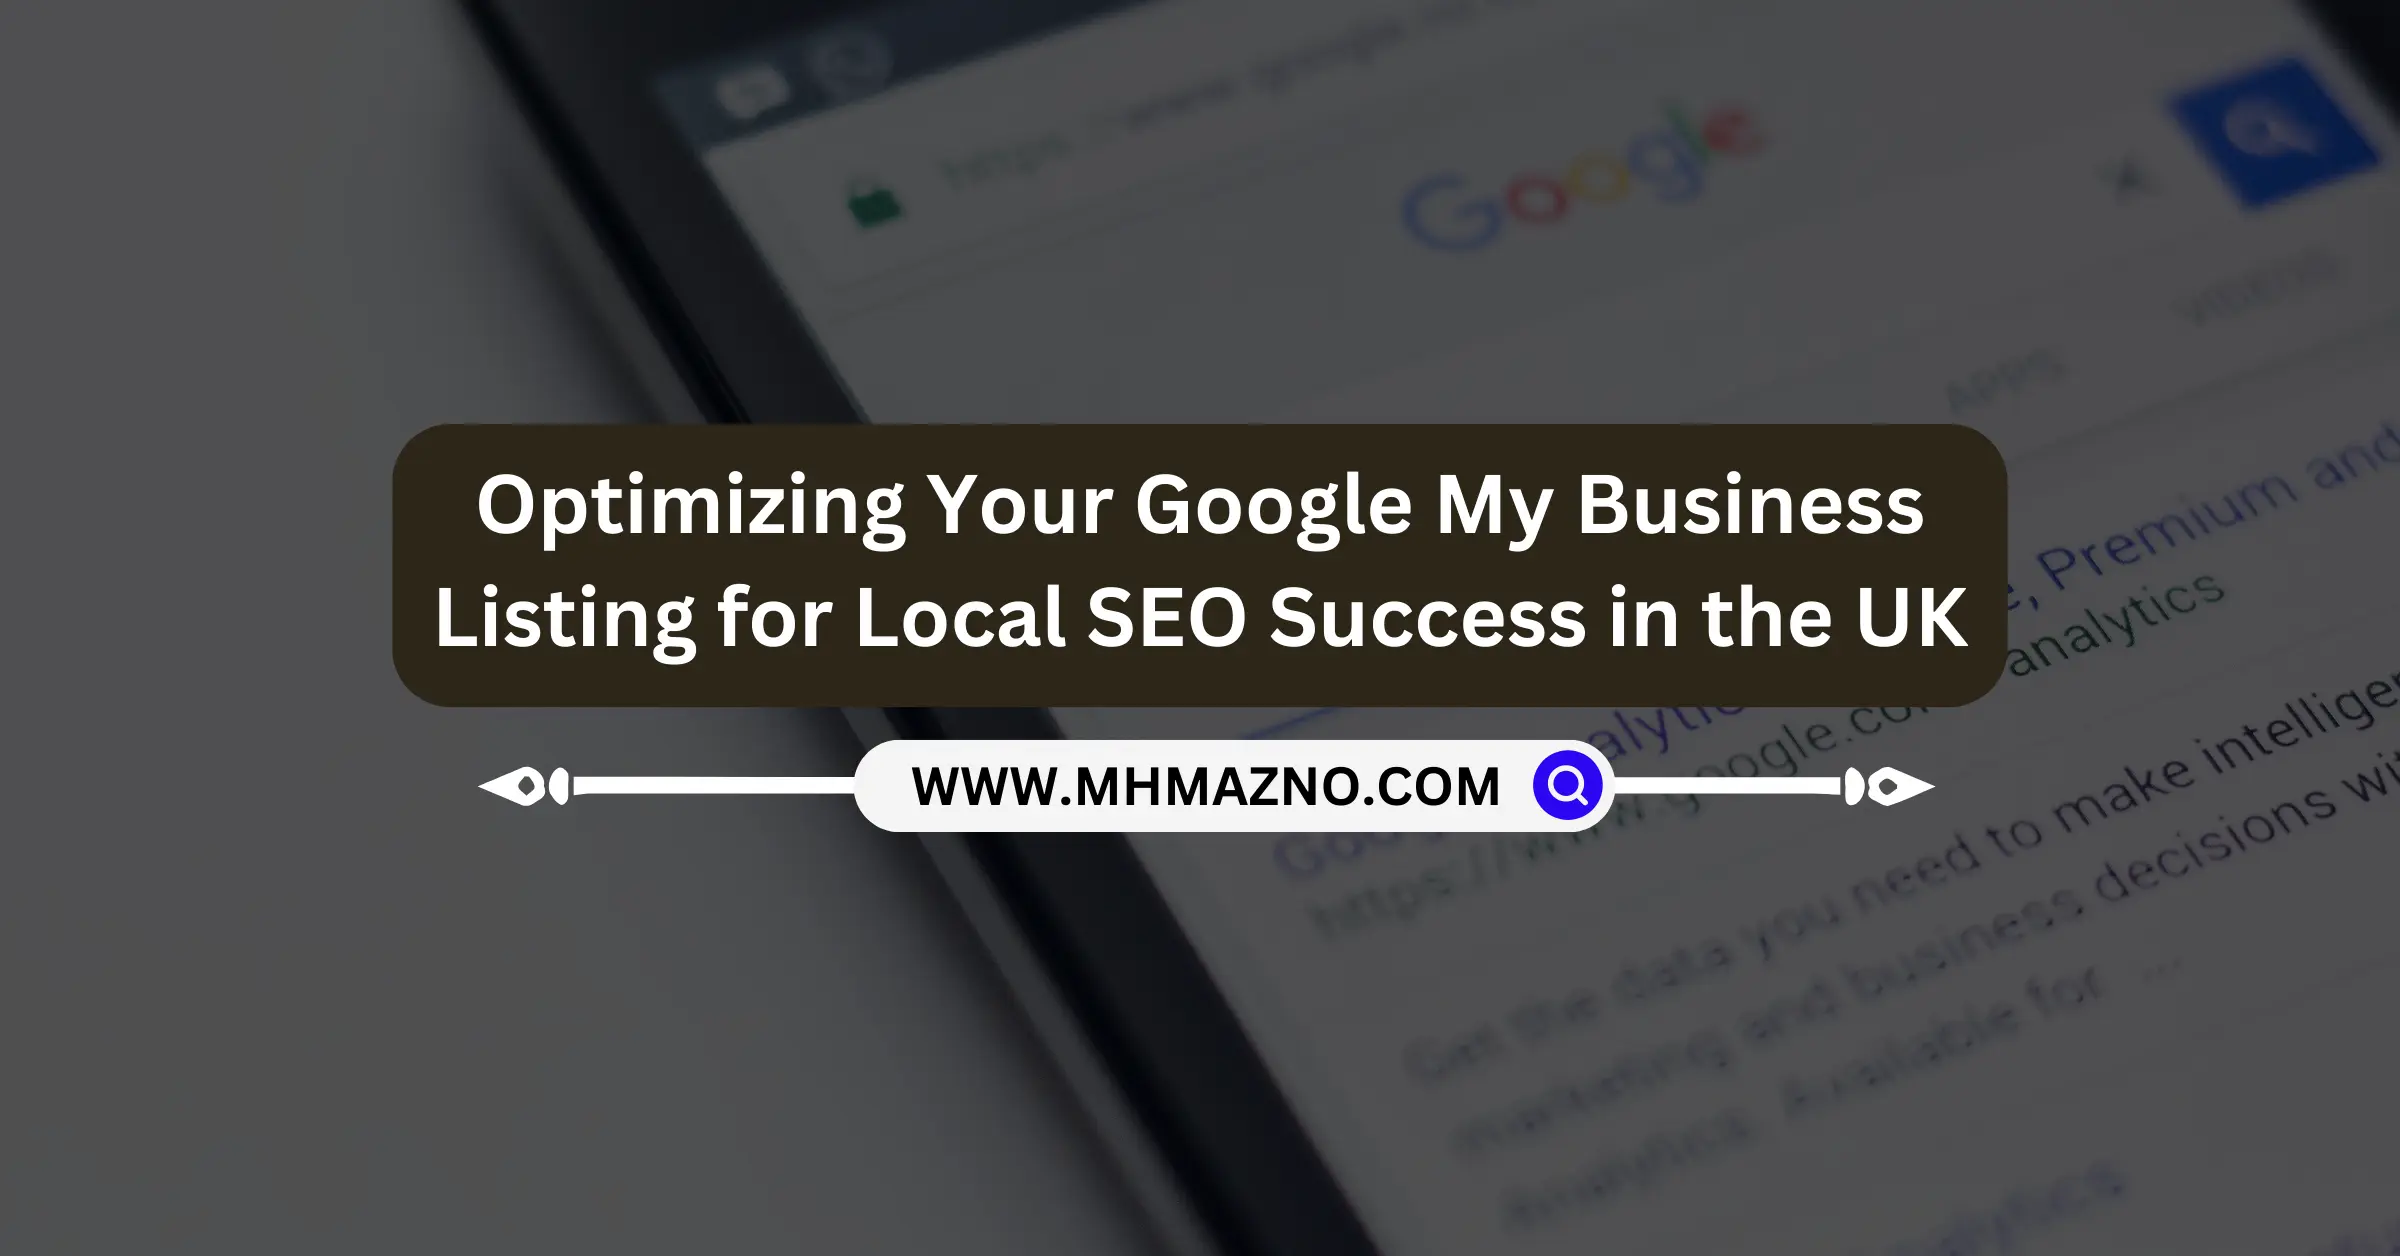 Optimizing Your Google My Business Listing for Local SEO Success in the UK